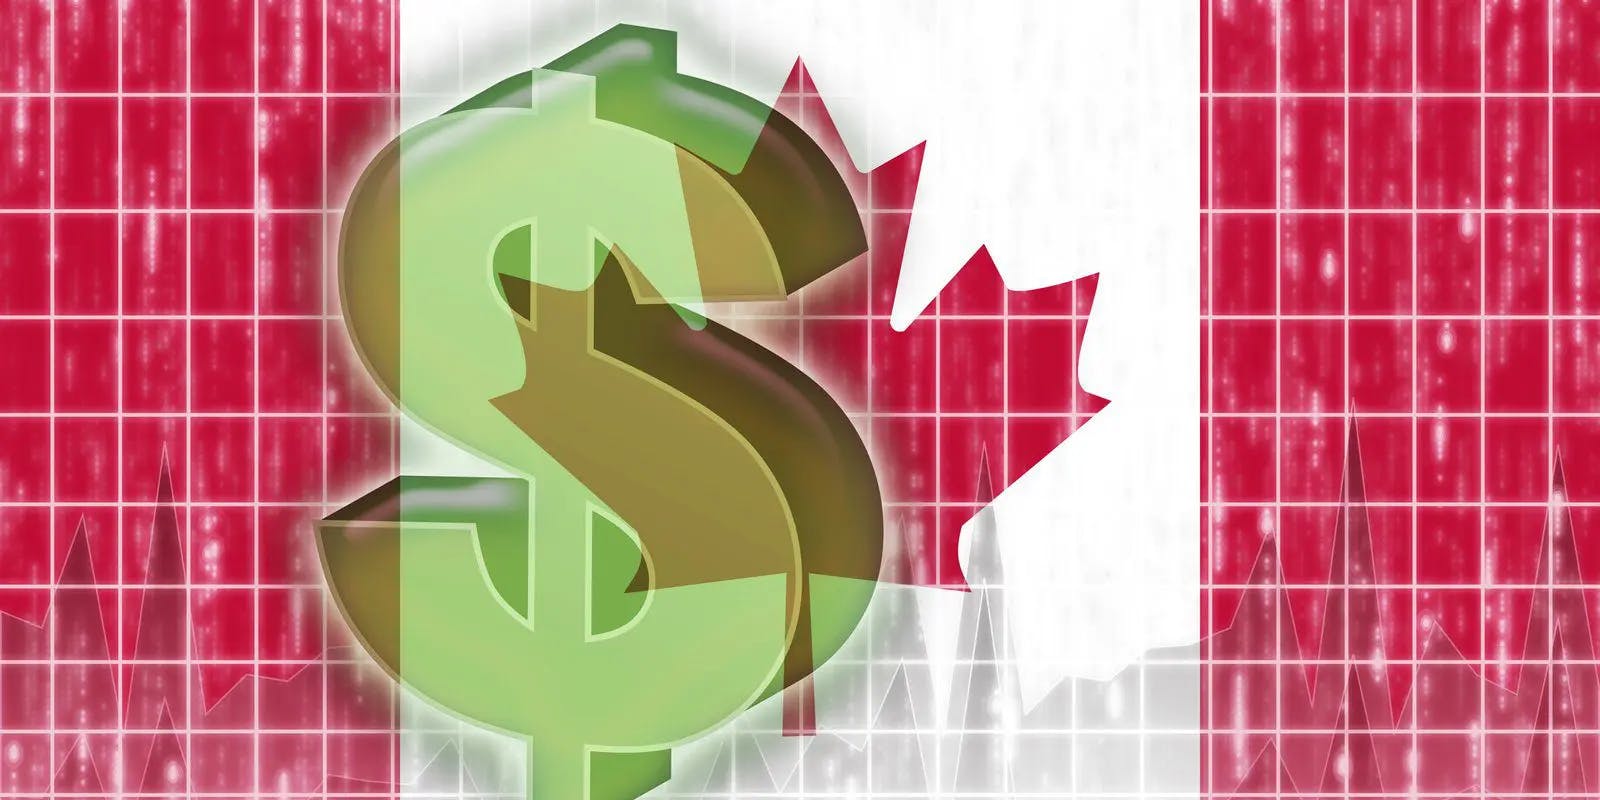 Canada Prime Rate: What is it and Why Should You Care About It?